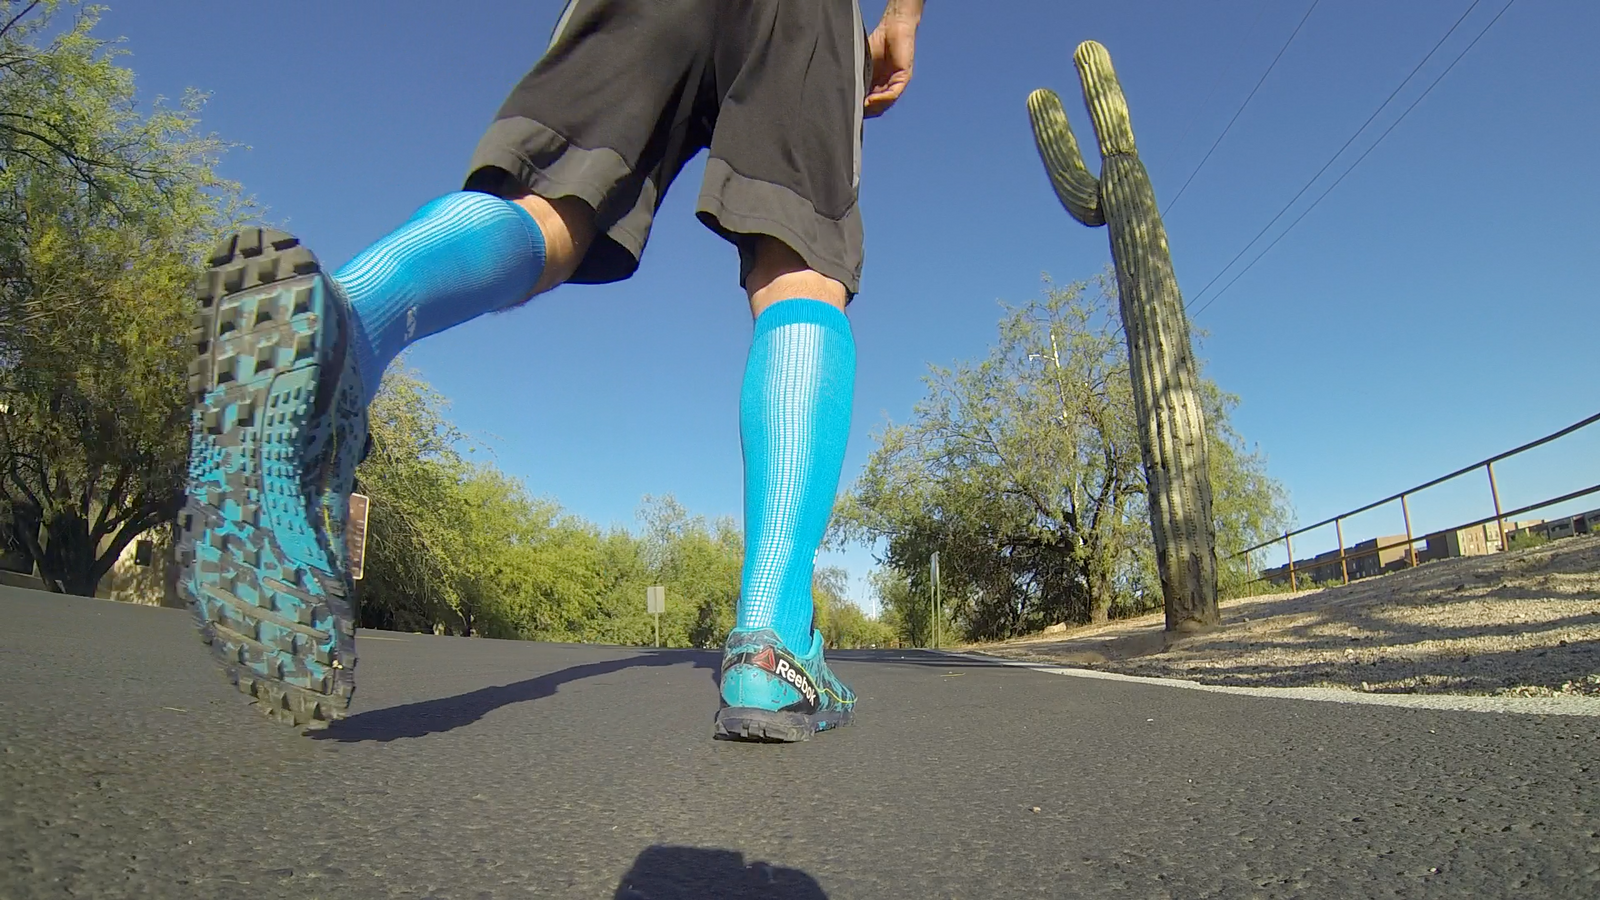 Compression socks can help with recovery